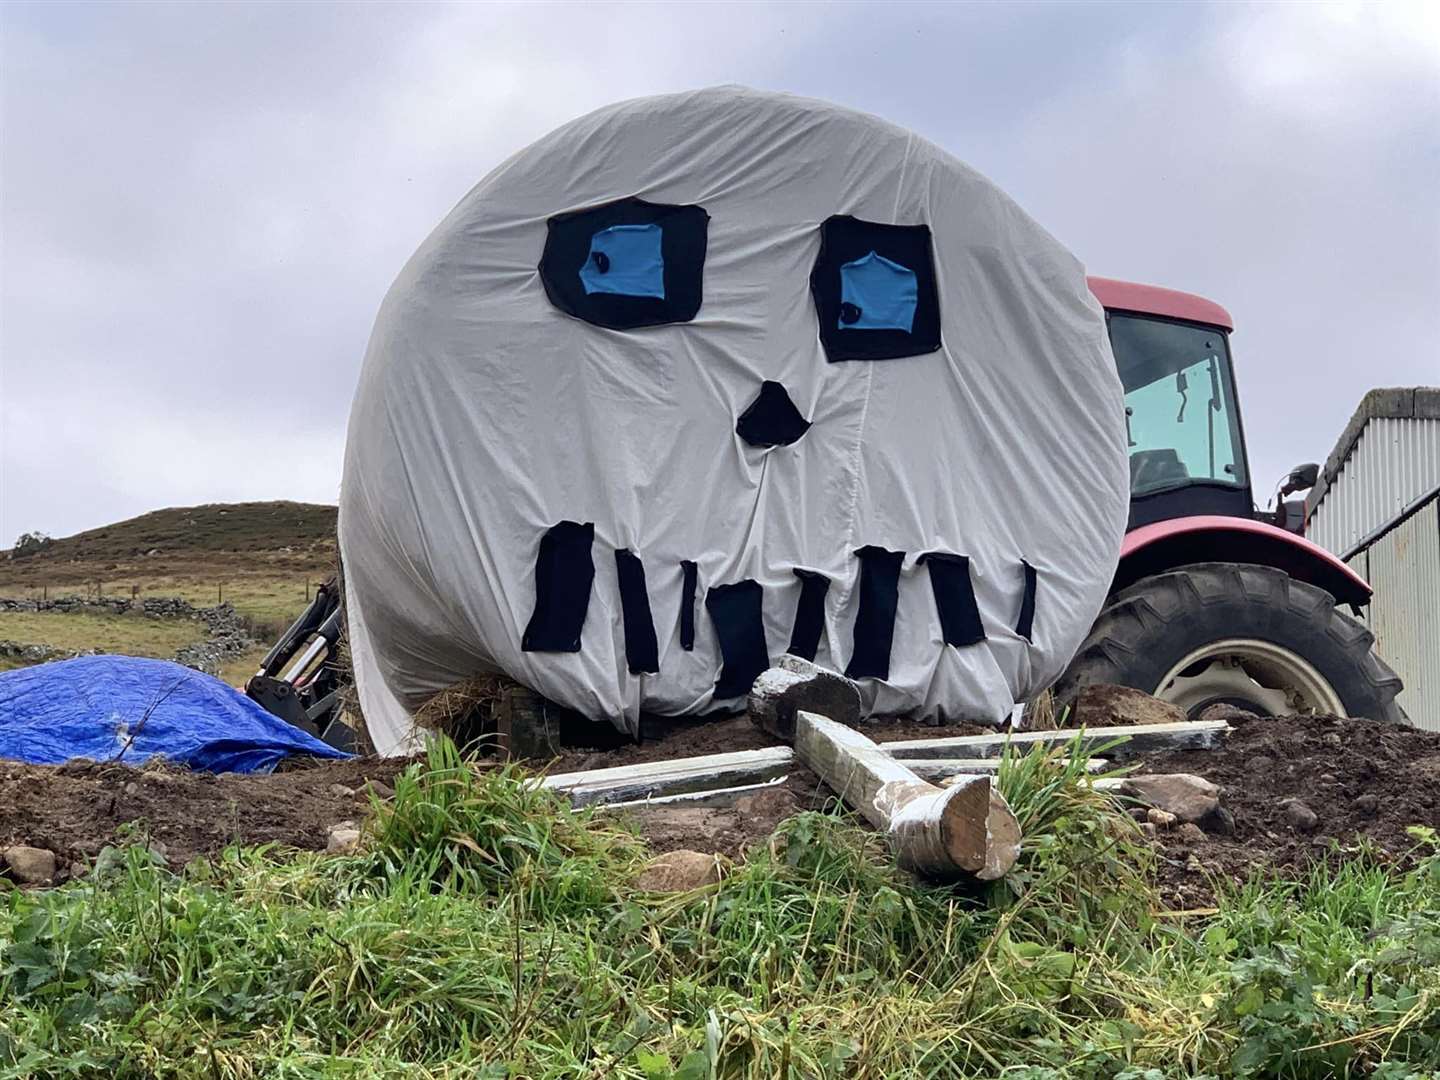 In fourth place was "The Hay Bale is Watching" in Melvich.